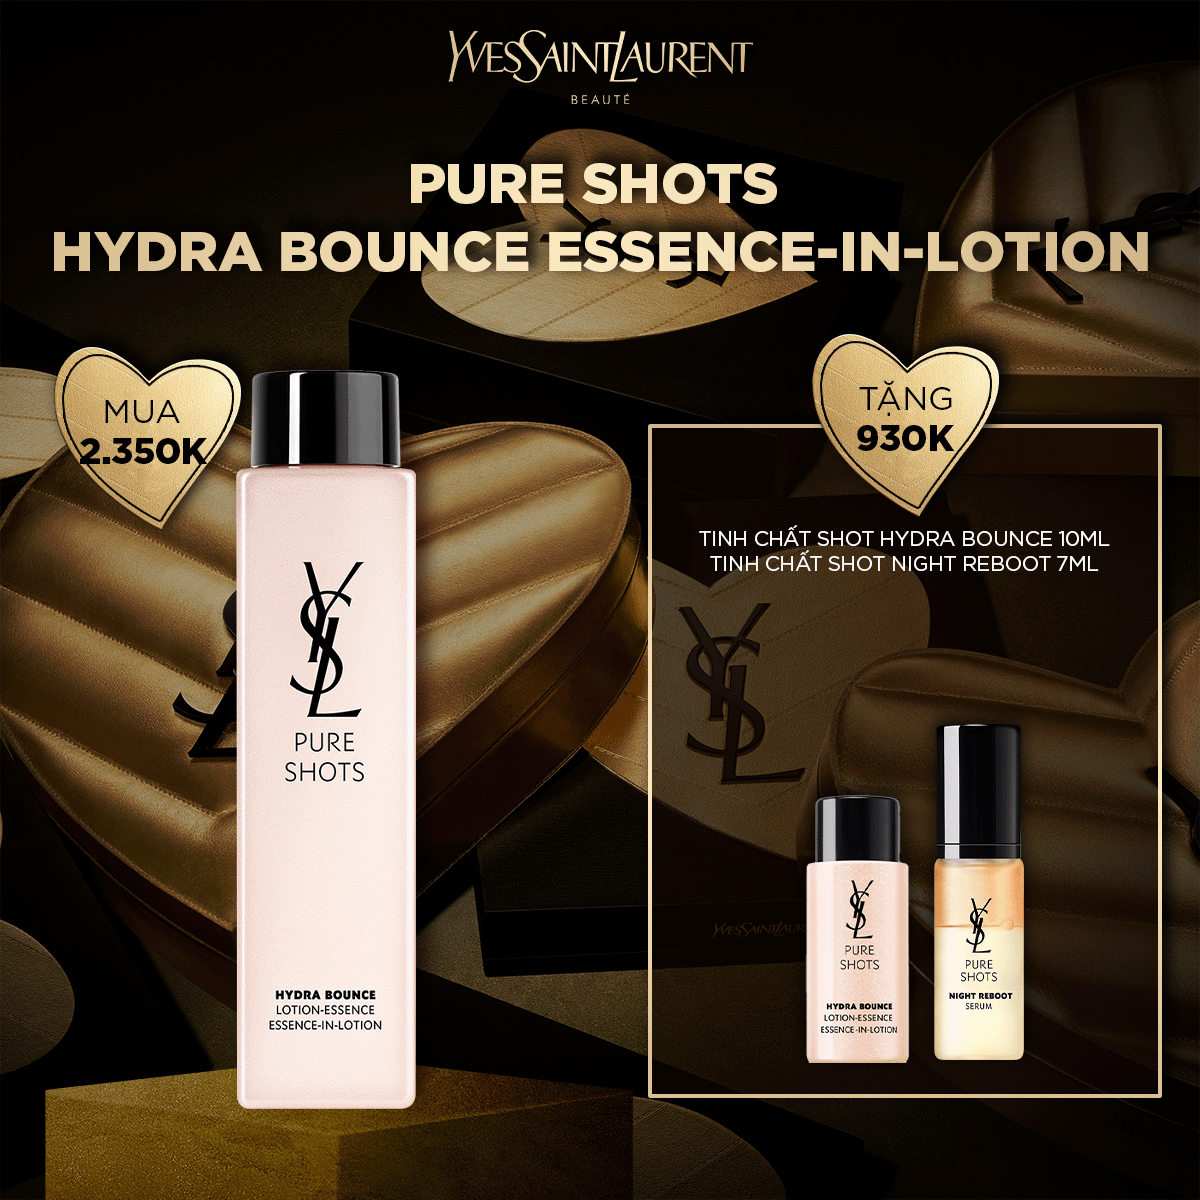 [FEB] Pure Shots Hydra Bounce Essence-in-Lotion